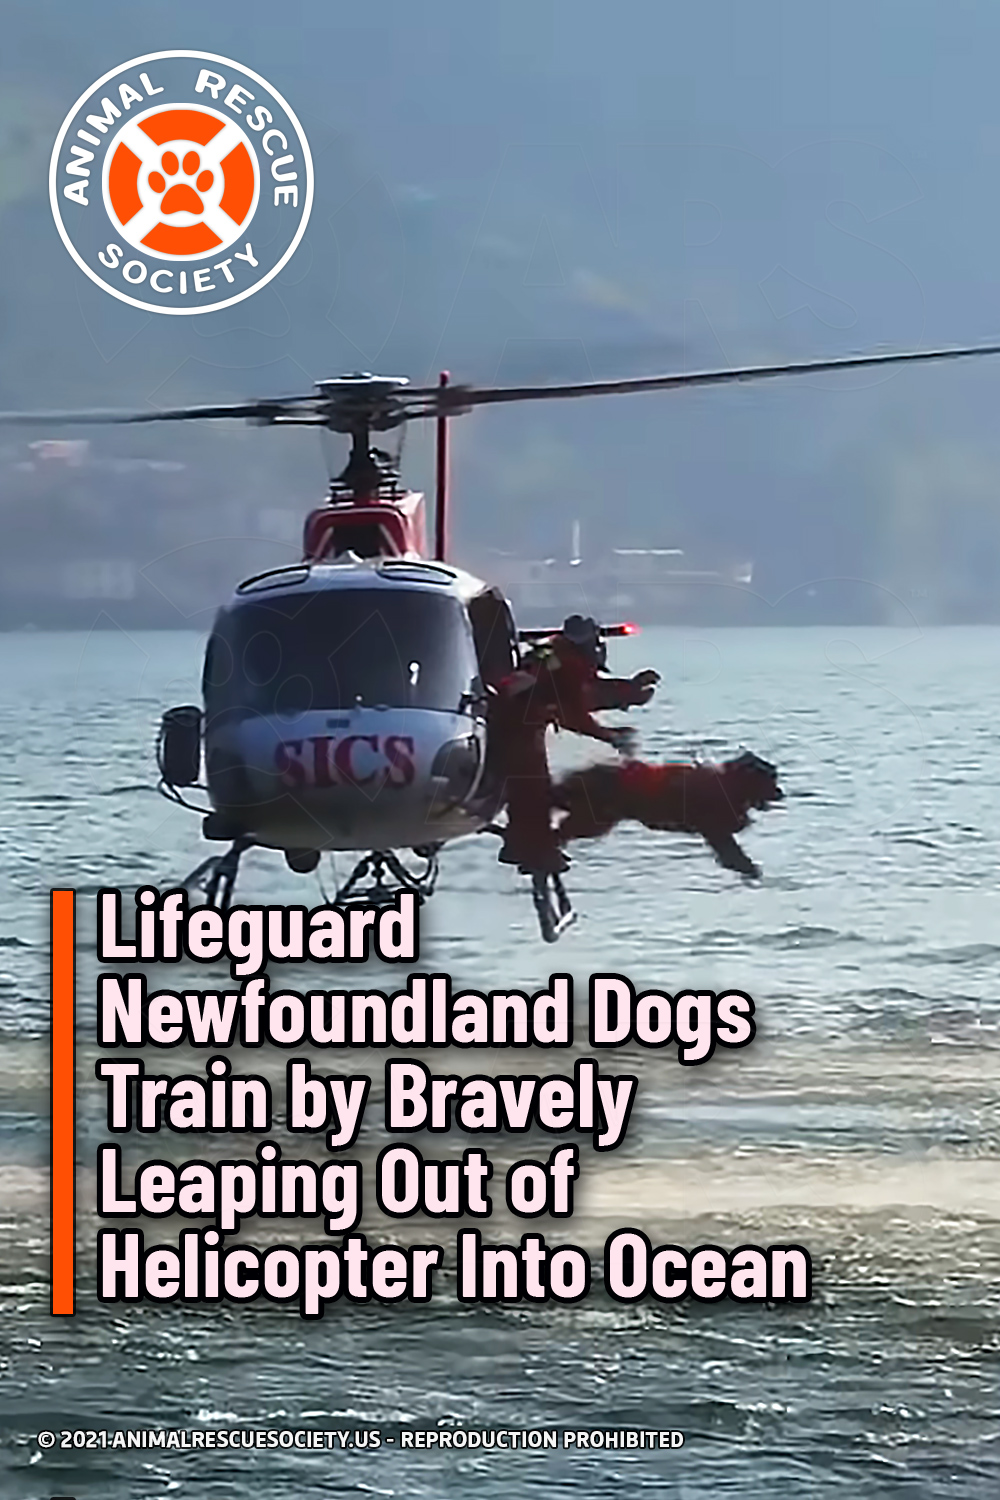 Lifeguard Newfoundland Dogs Train by Bravely Leaping Out of Helicopter Into Ocean